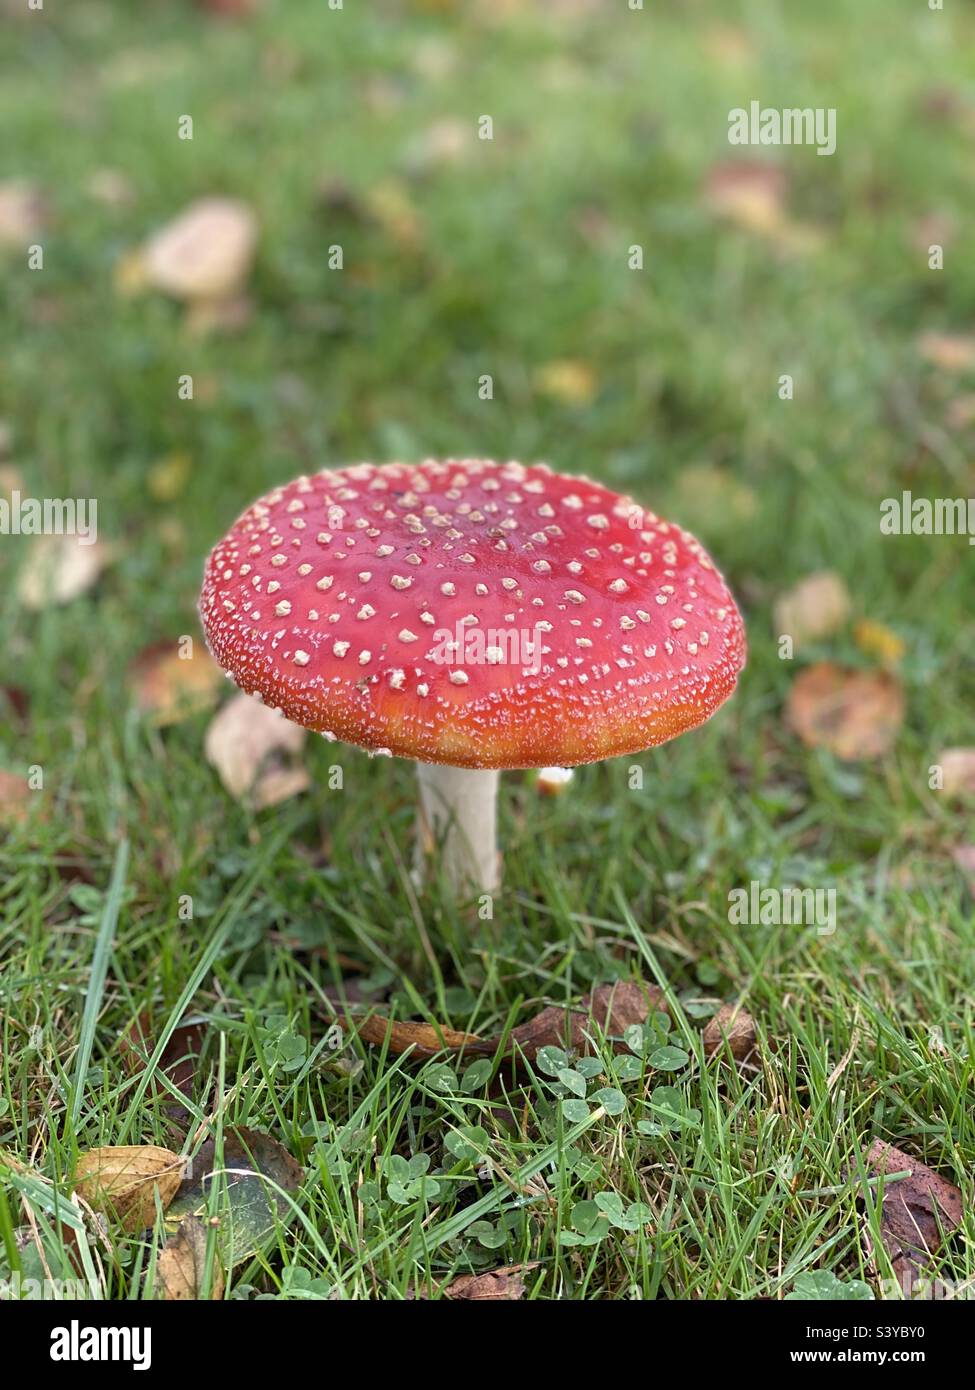 Toadstool red with white spots in green grass Stock Photo